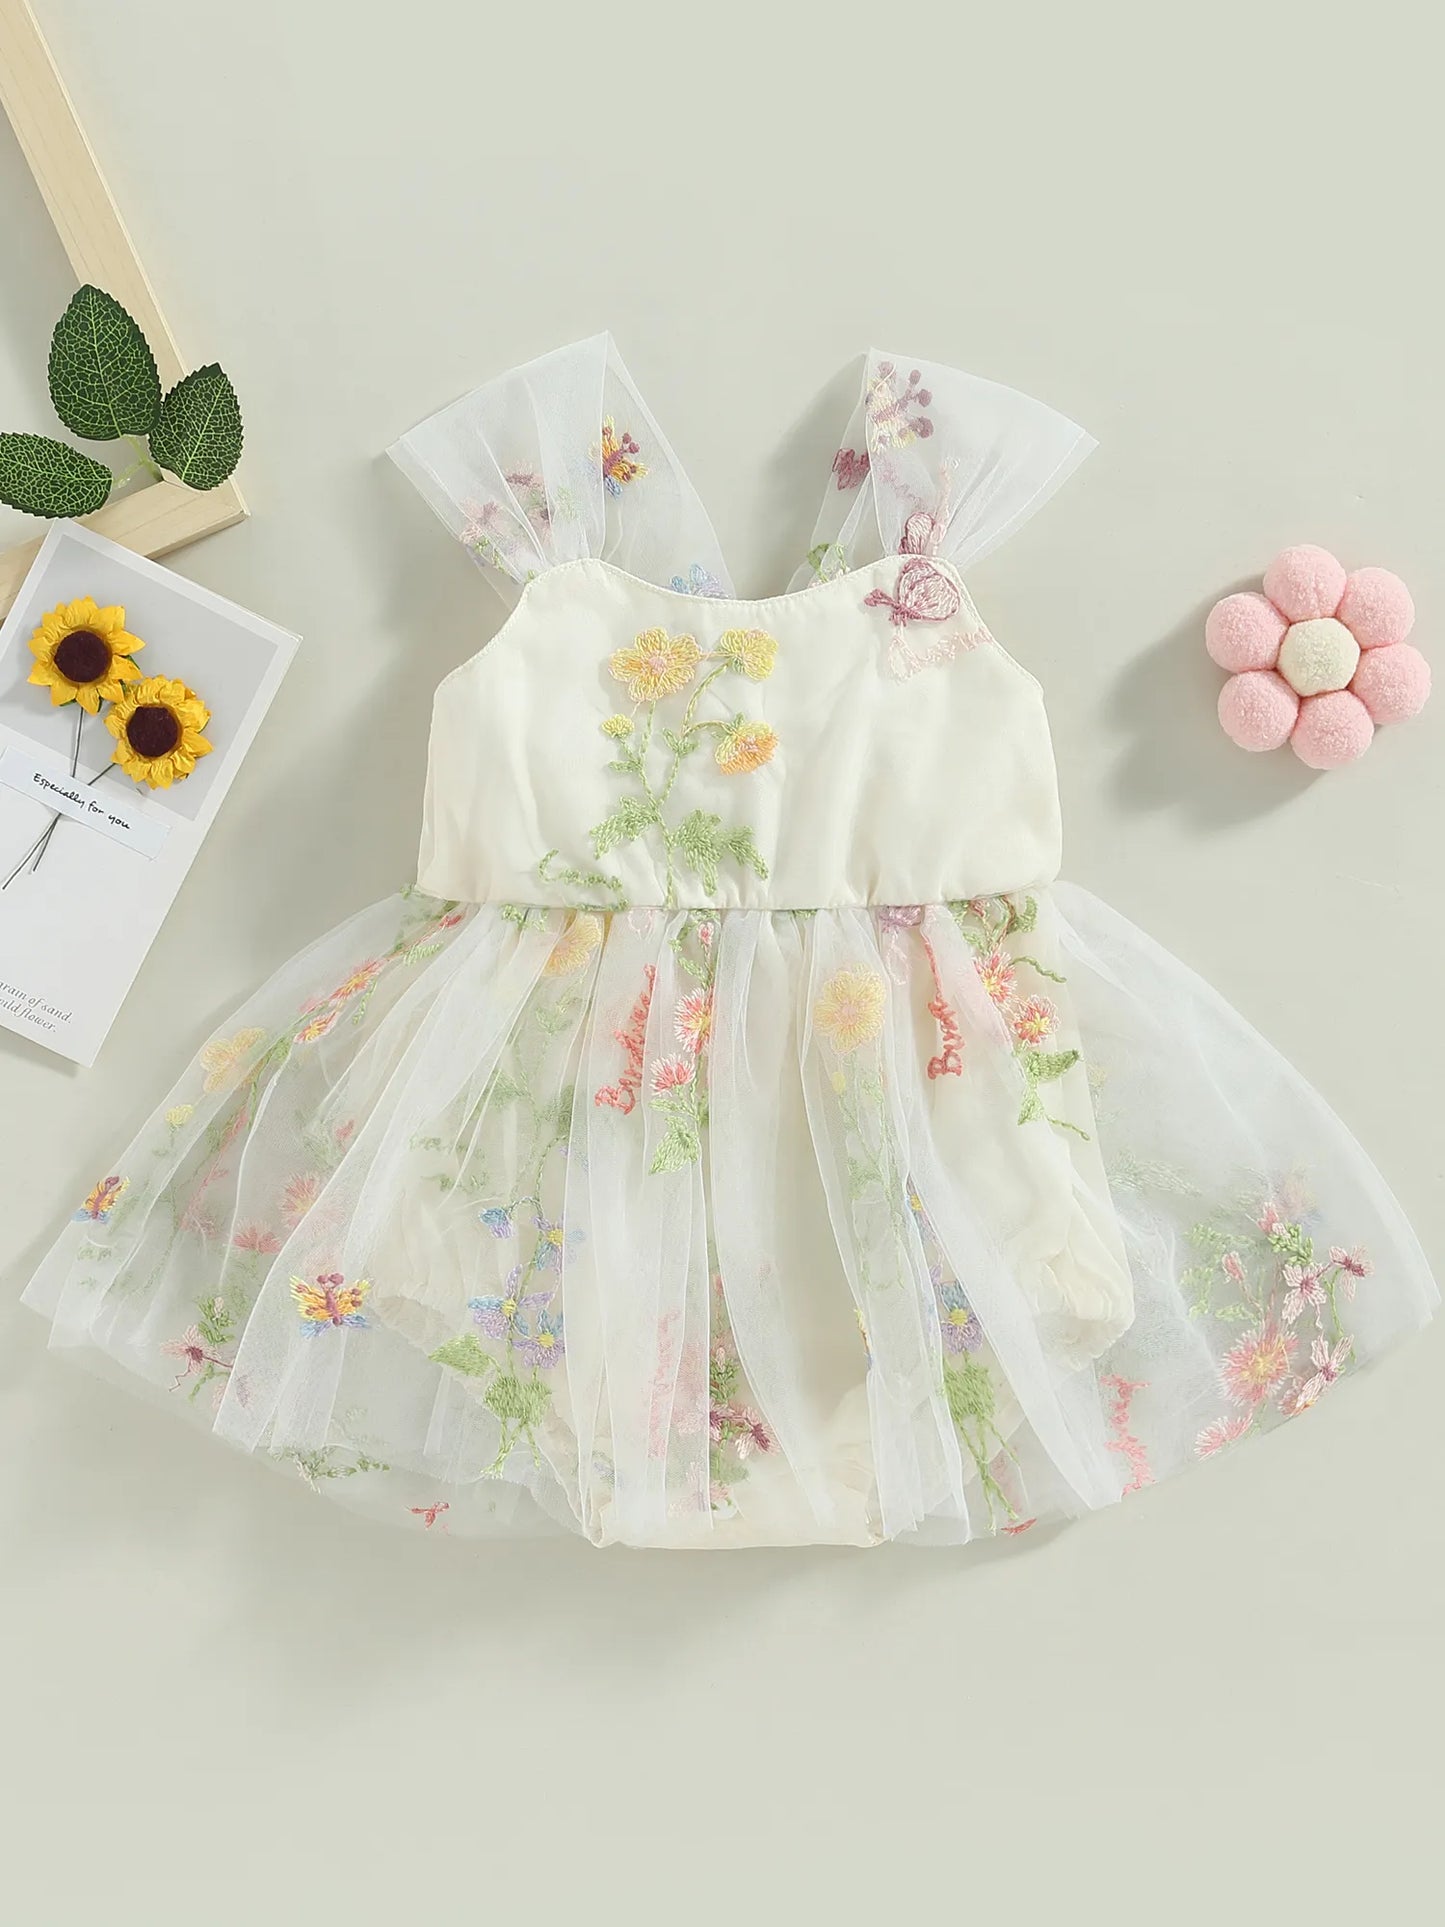 Baby Girl Floral Embroidered Romper Dress with Mesh Tutu Tulle Skirt - Adorable Sleeveless Infant Outfit for Summer